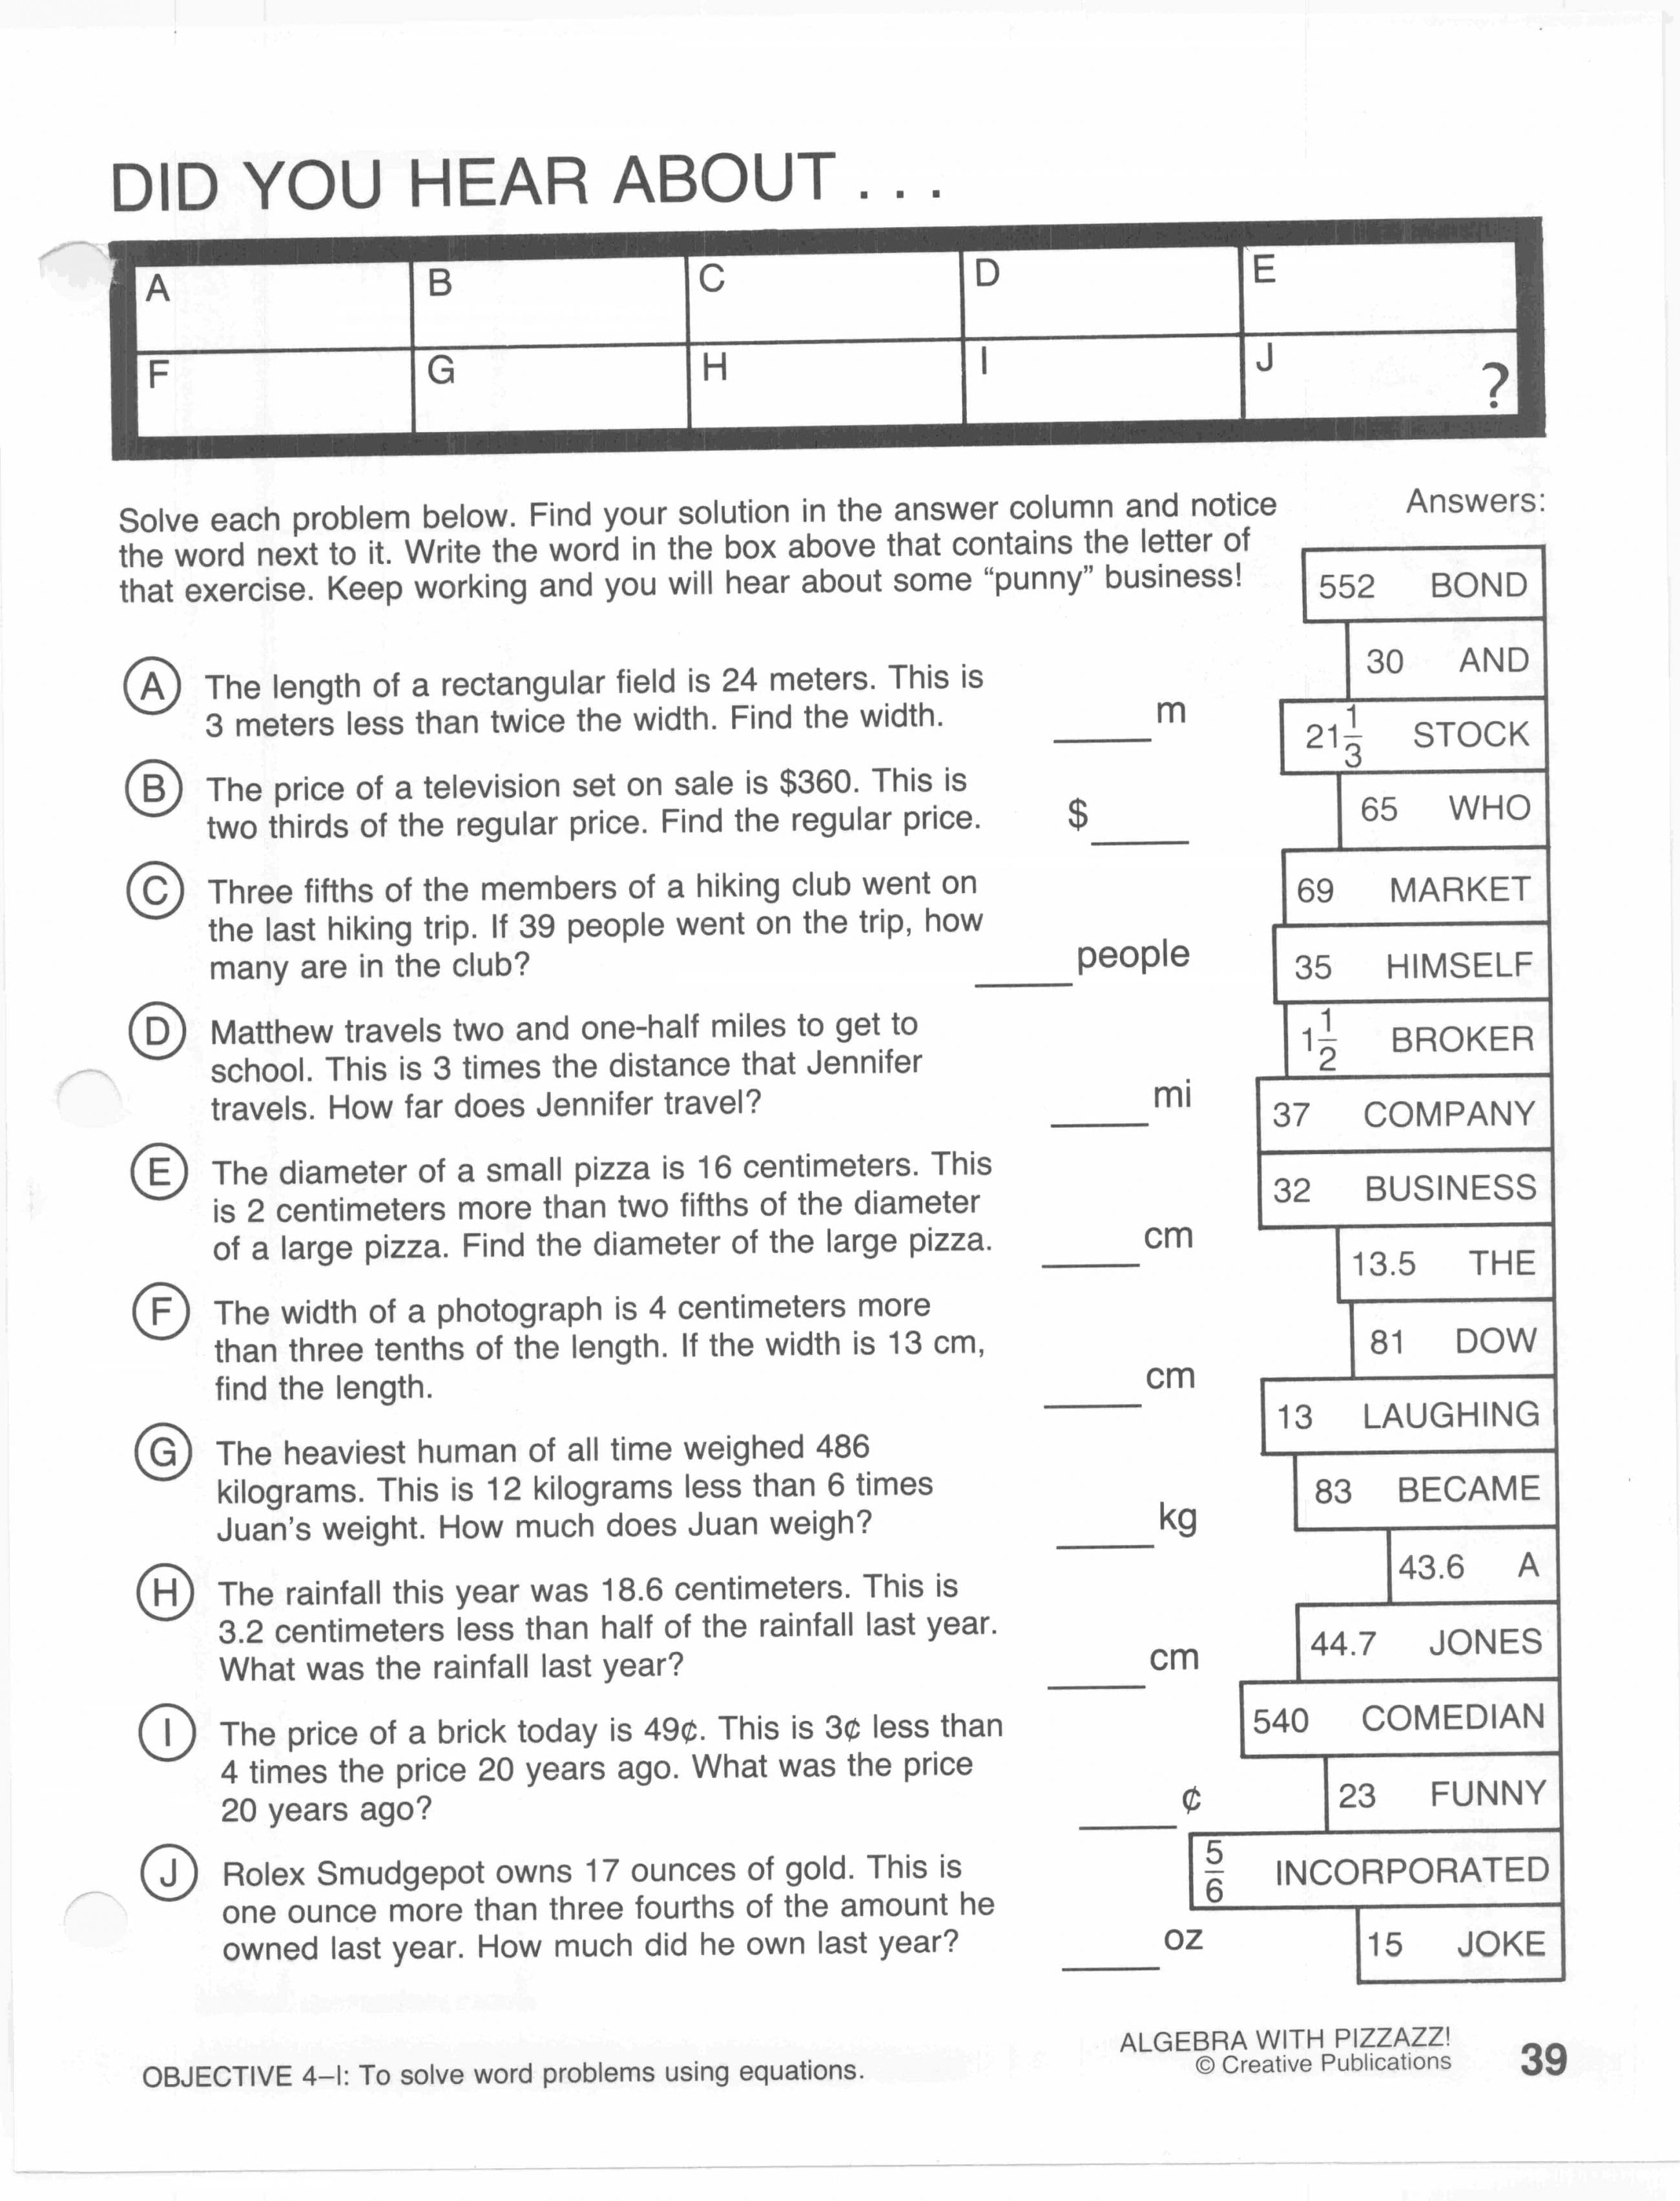 Best Ideas Of Worksheet Did You Hear About Worksheet Answers Concept Intended For Did You Hear About Algebra Worksheet Answers